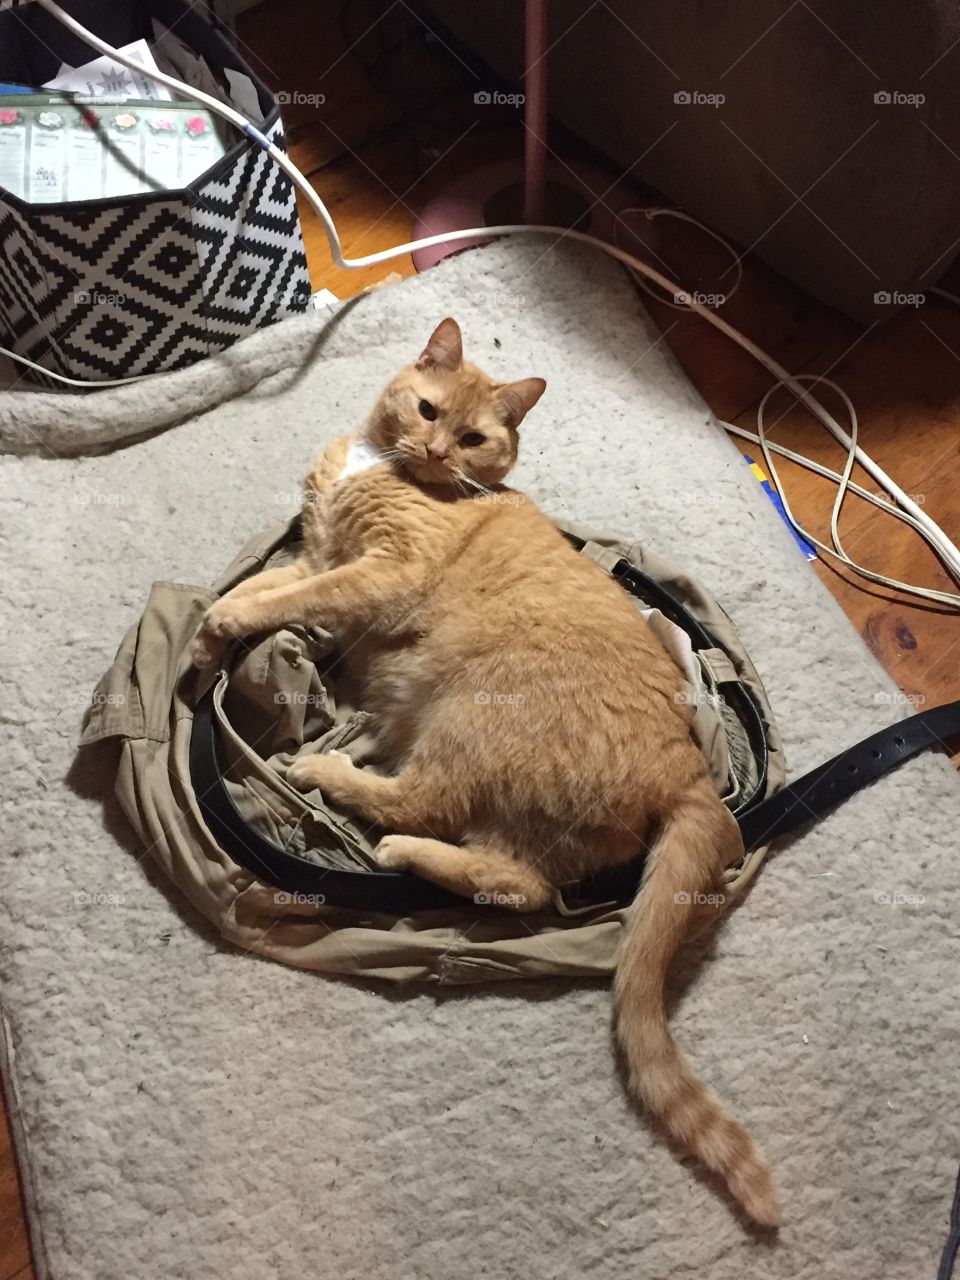 Who needs a cat bed?